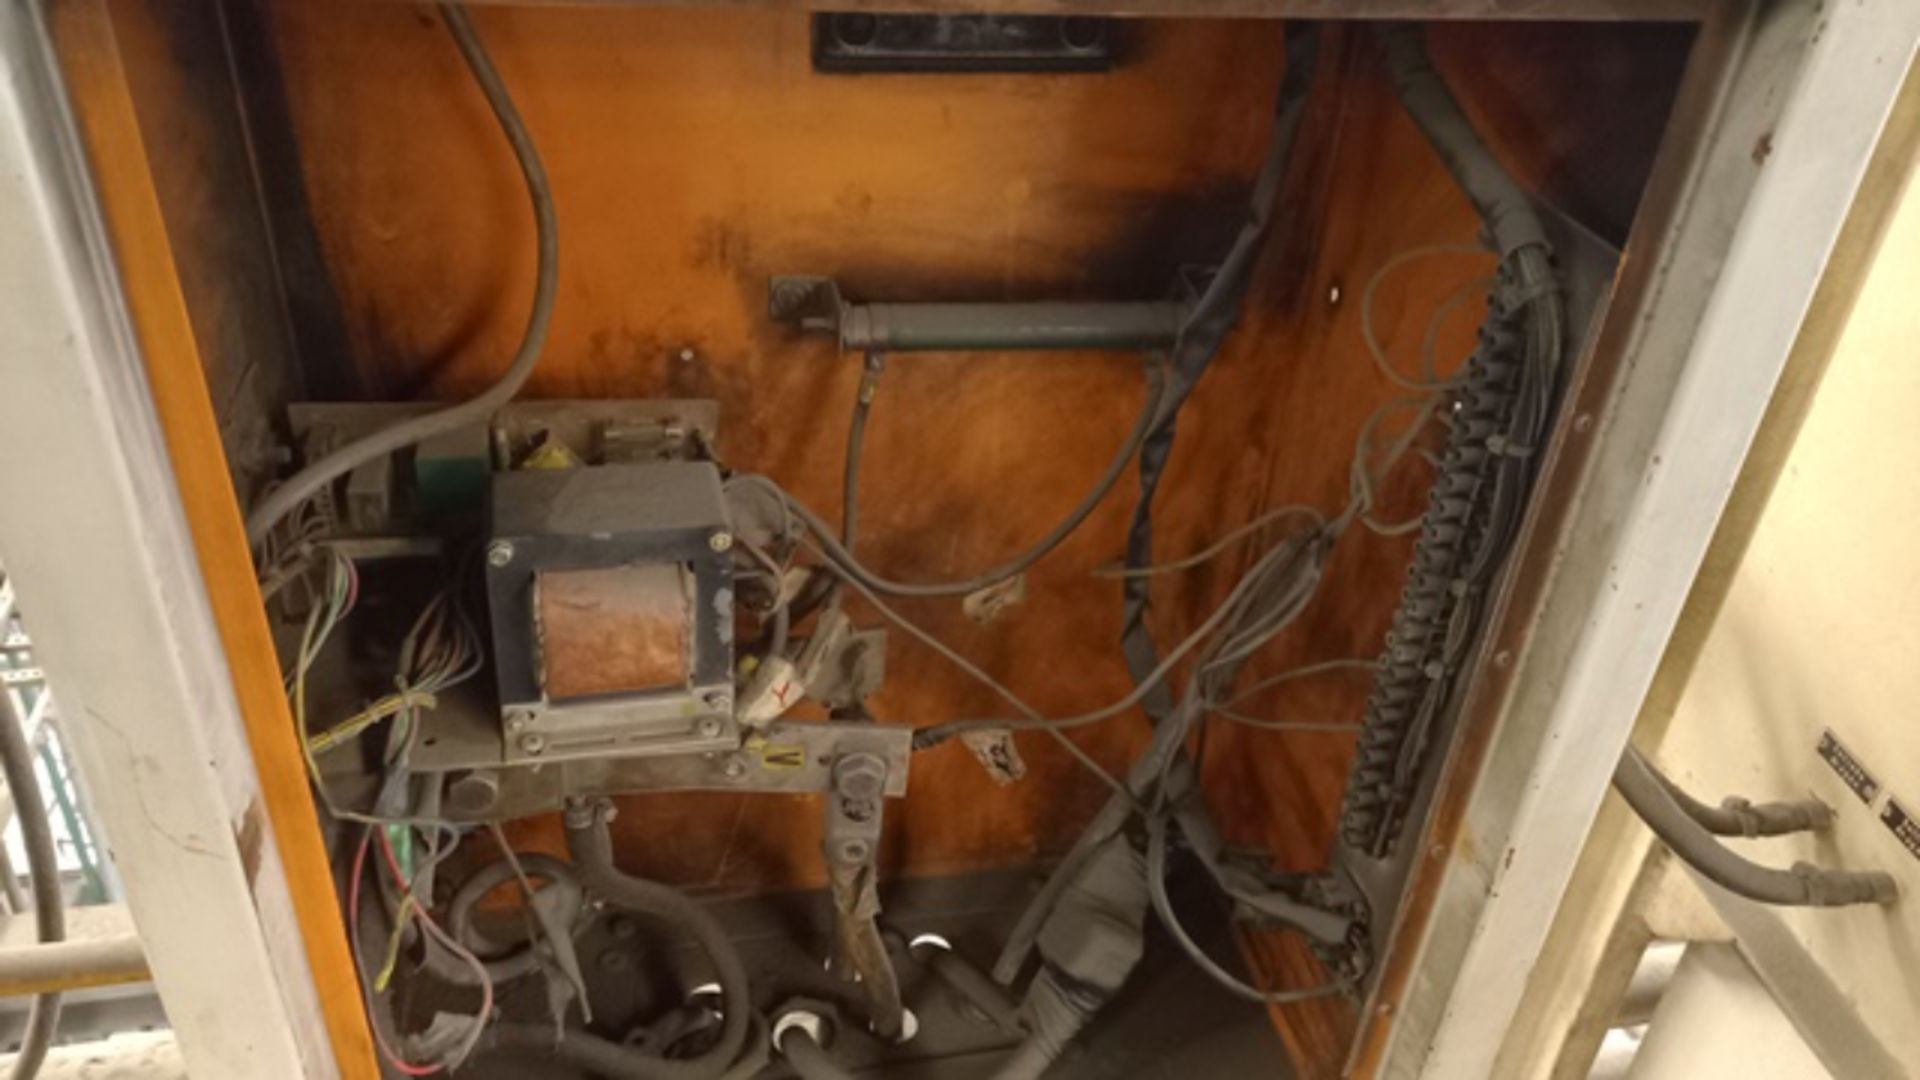 100 KVA Messer Griesheim UP100E Spot Welder, MPS1043 Control, Harms & Wende System *Needs New Board* - Image 4 of 4